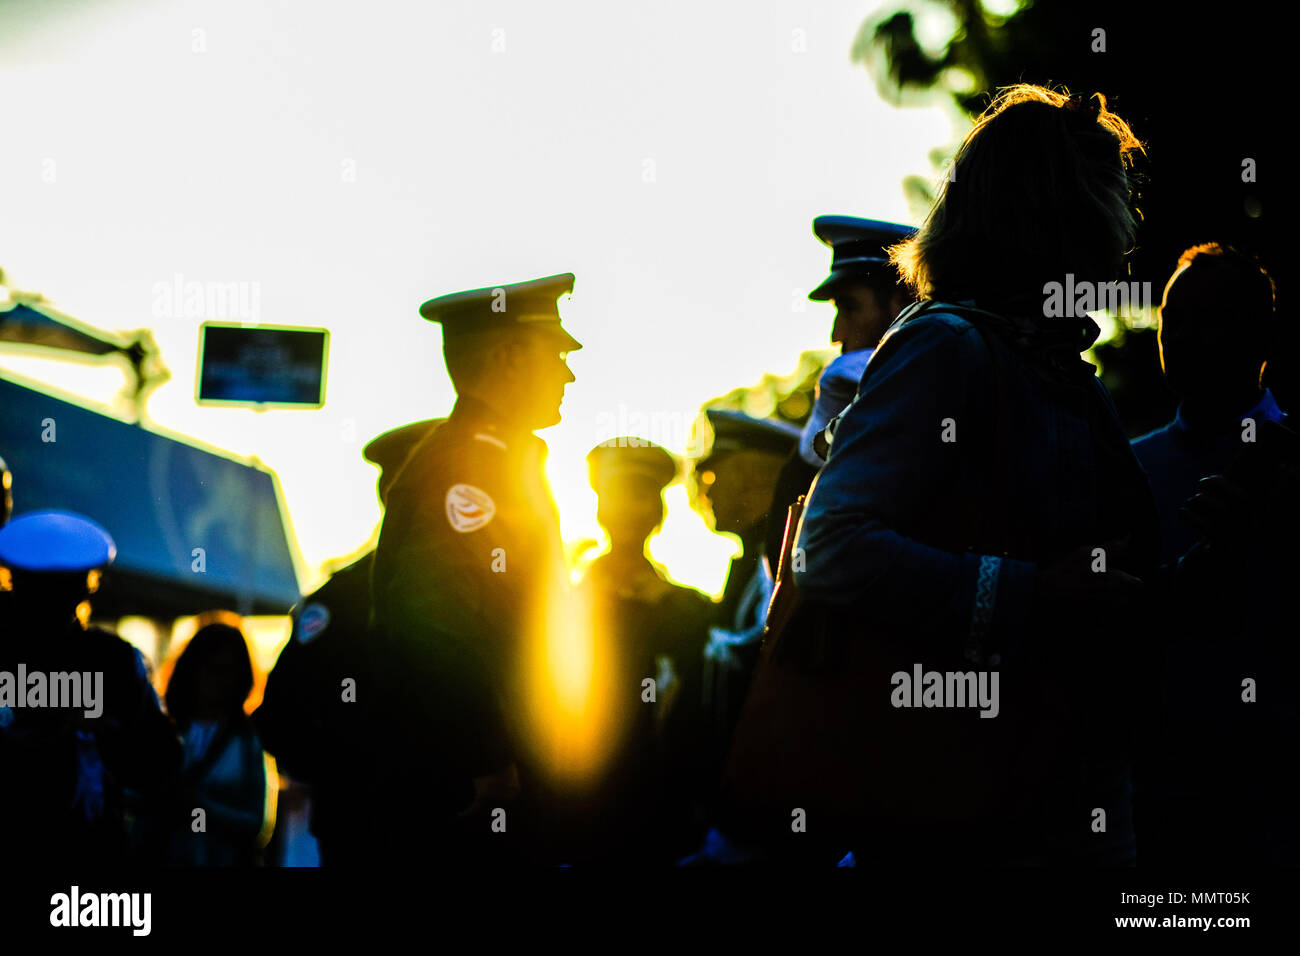 Cannes, France. 12th May 2018. Atmosphere at Palais des Festivals on Saturday 12 May 2018 during the 71st Cannes Film Festival held at Palais des Festivals, Cannes. Pictured: Police officers in the evening light. Picture by Julie Edwards/LFI/Avalon. Credit: Julie Edwards/Alamy Live News Stock Photo